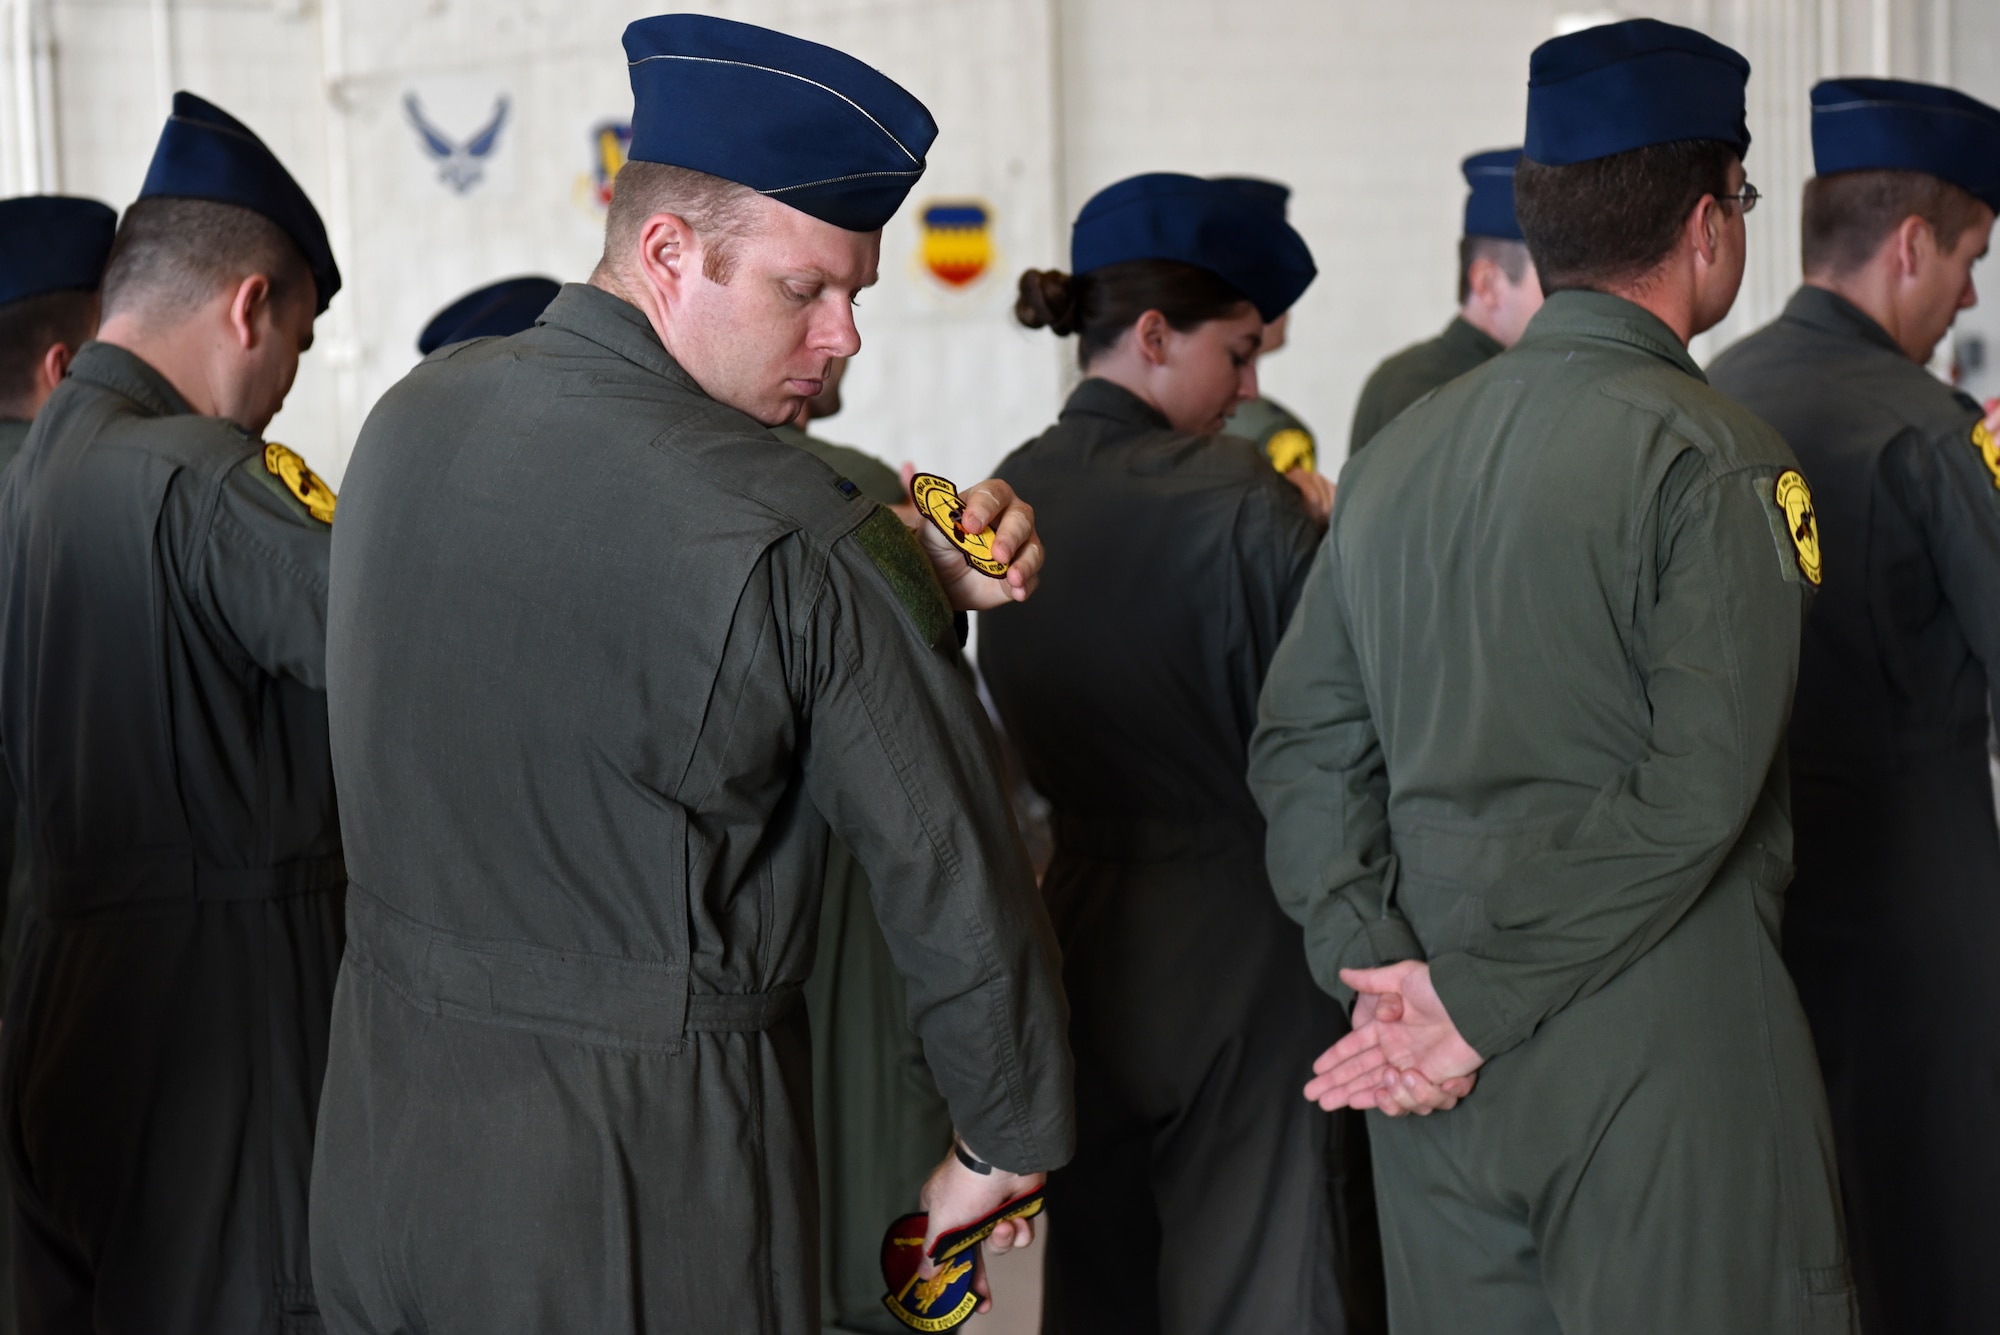 U.S. Air Force Airmen place 482nd Attack Squadron patches on their flight suits at Shaw Air Force Base, S.C., Oct. 3, 2018